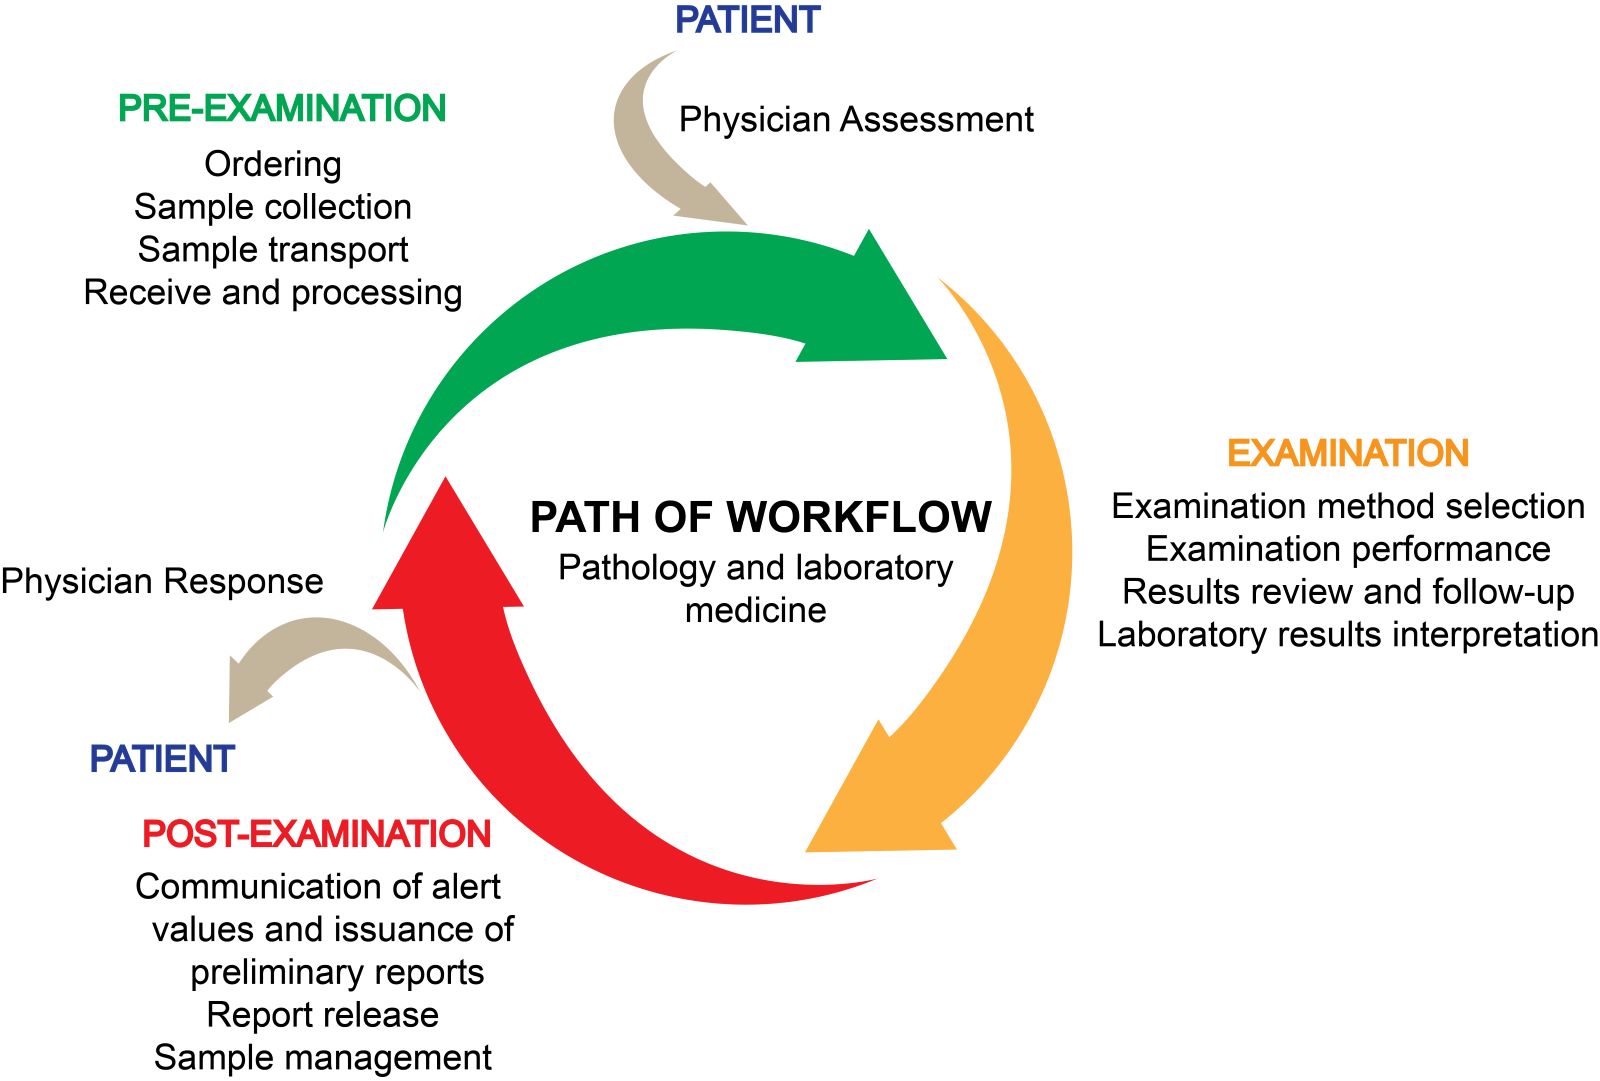 The path of workflow